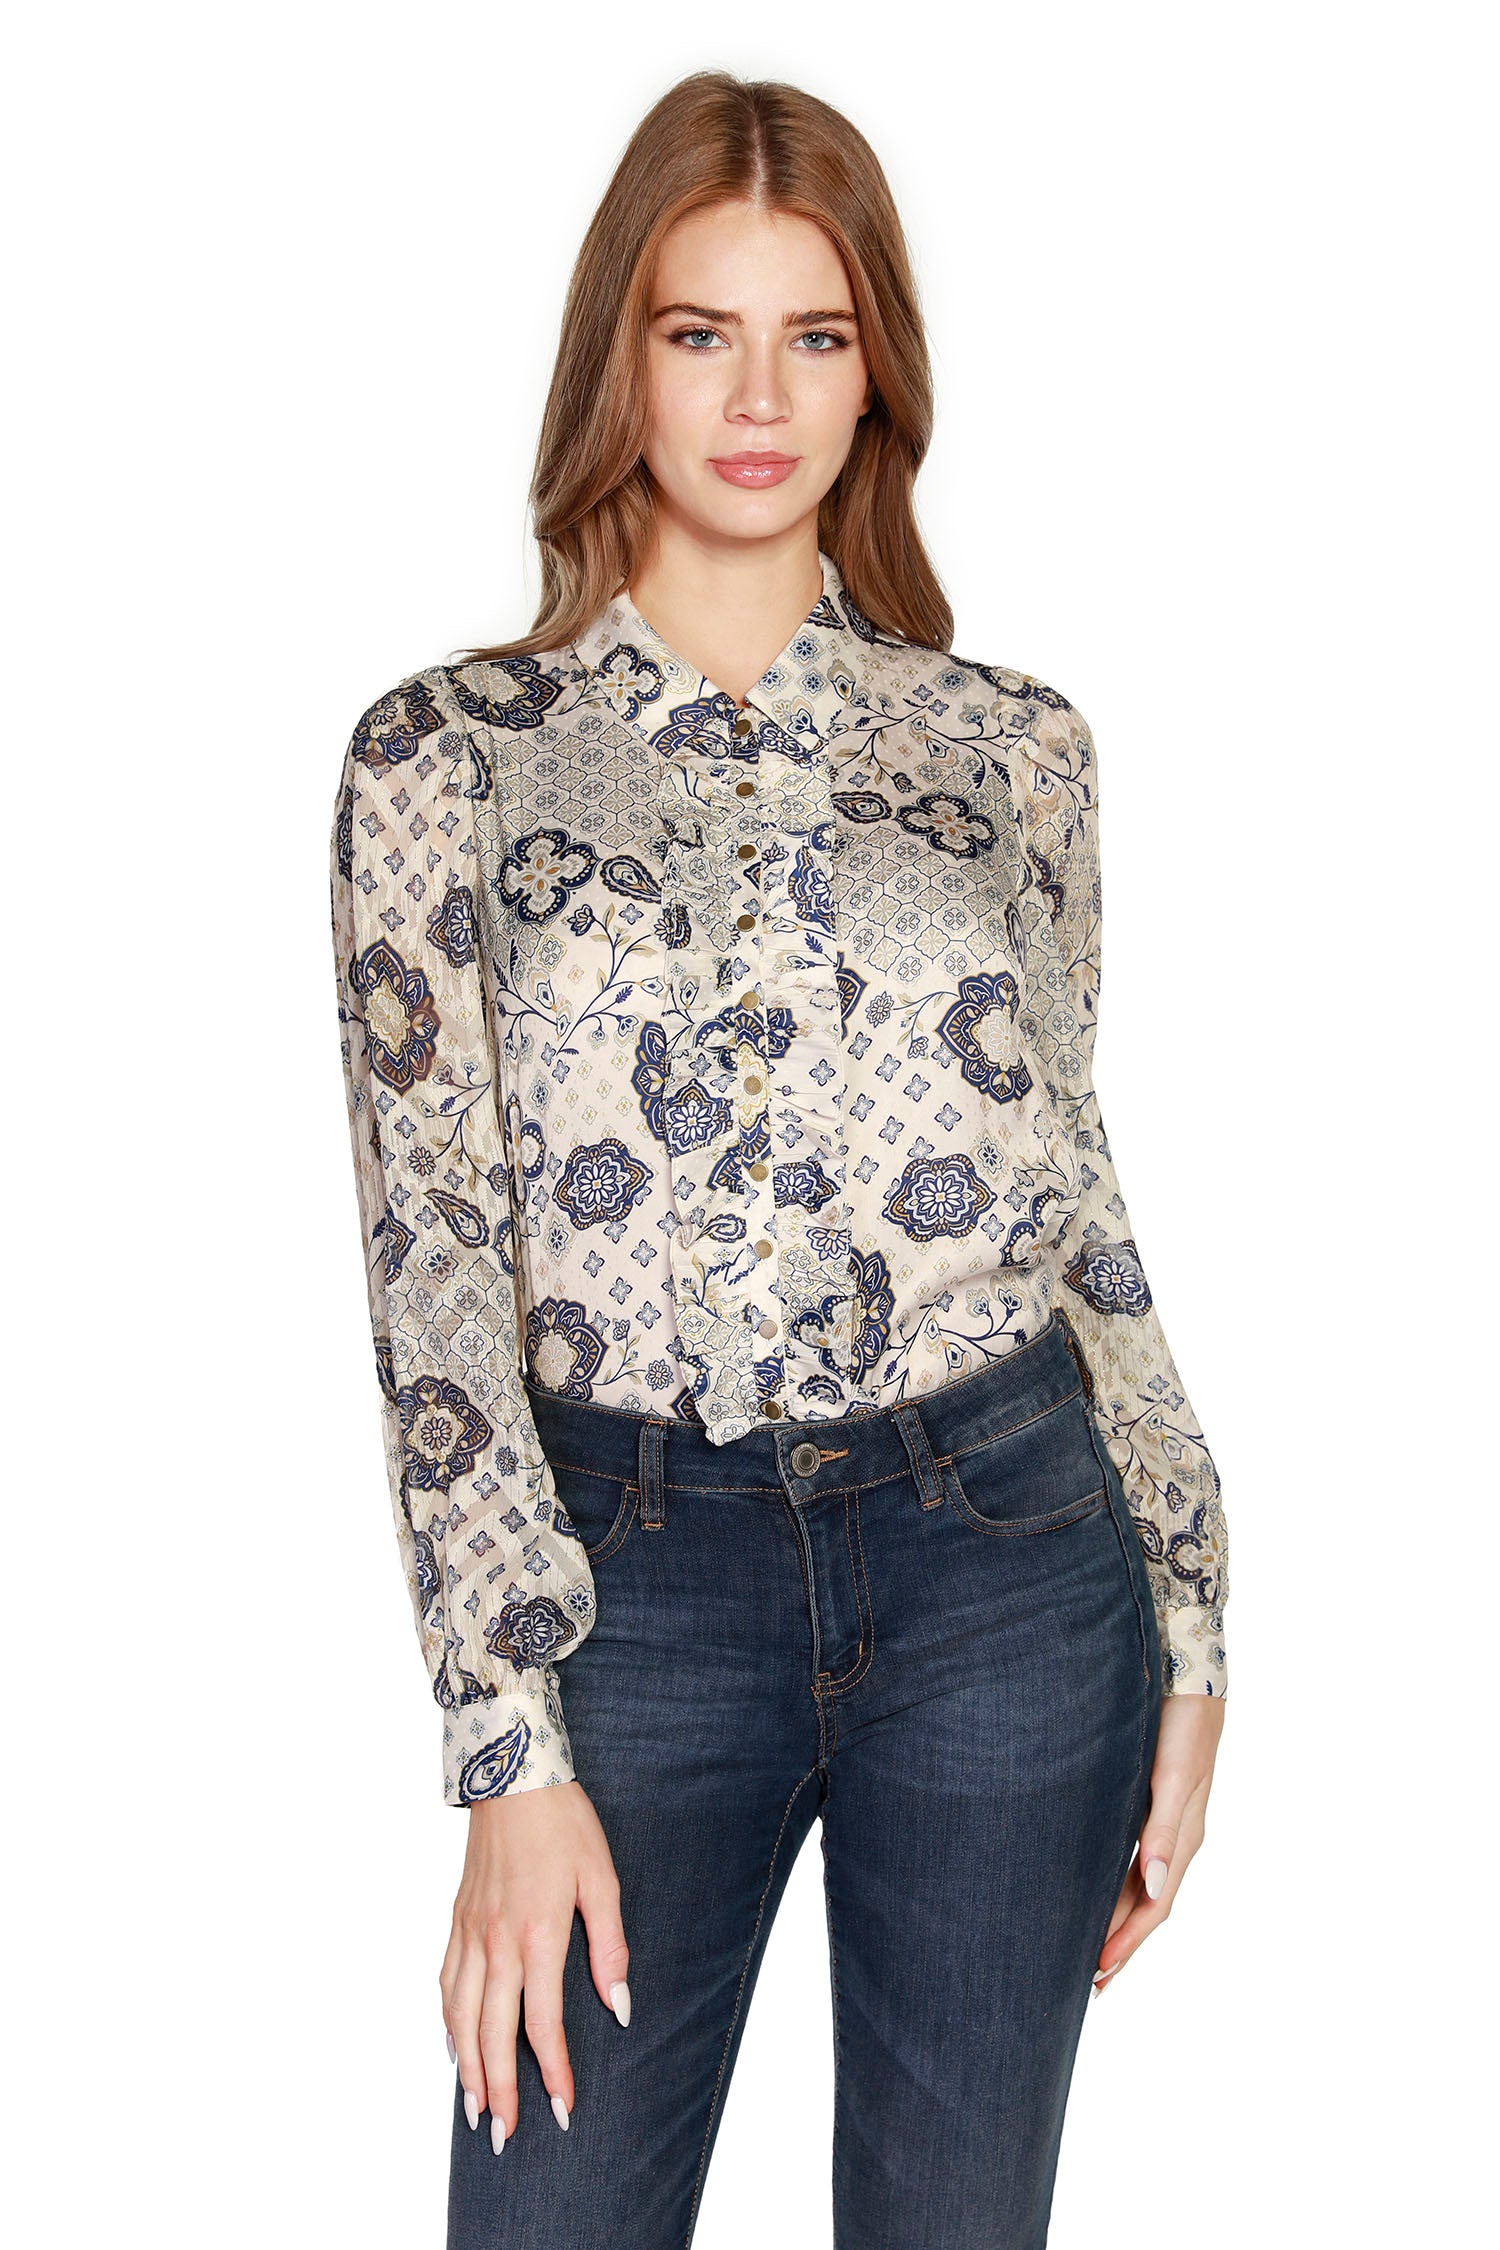 Women's Ruffled Button Front Blouse with Spread Collar | LAST CALL